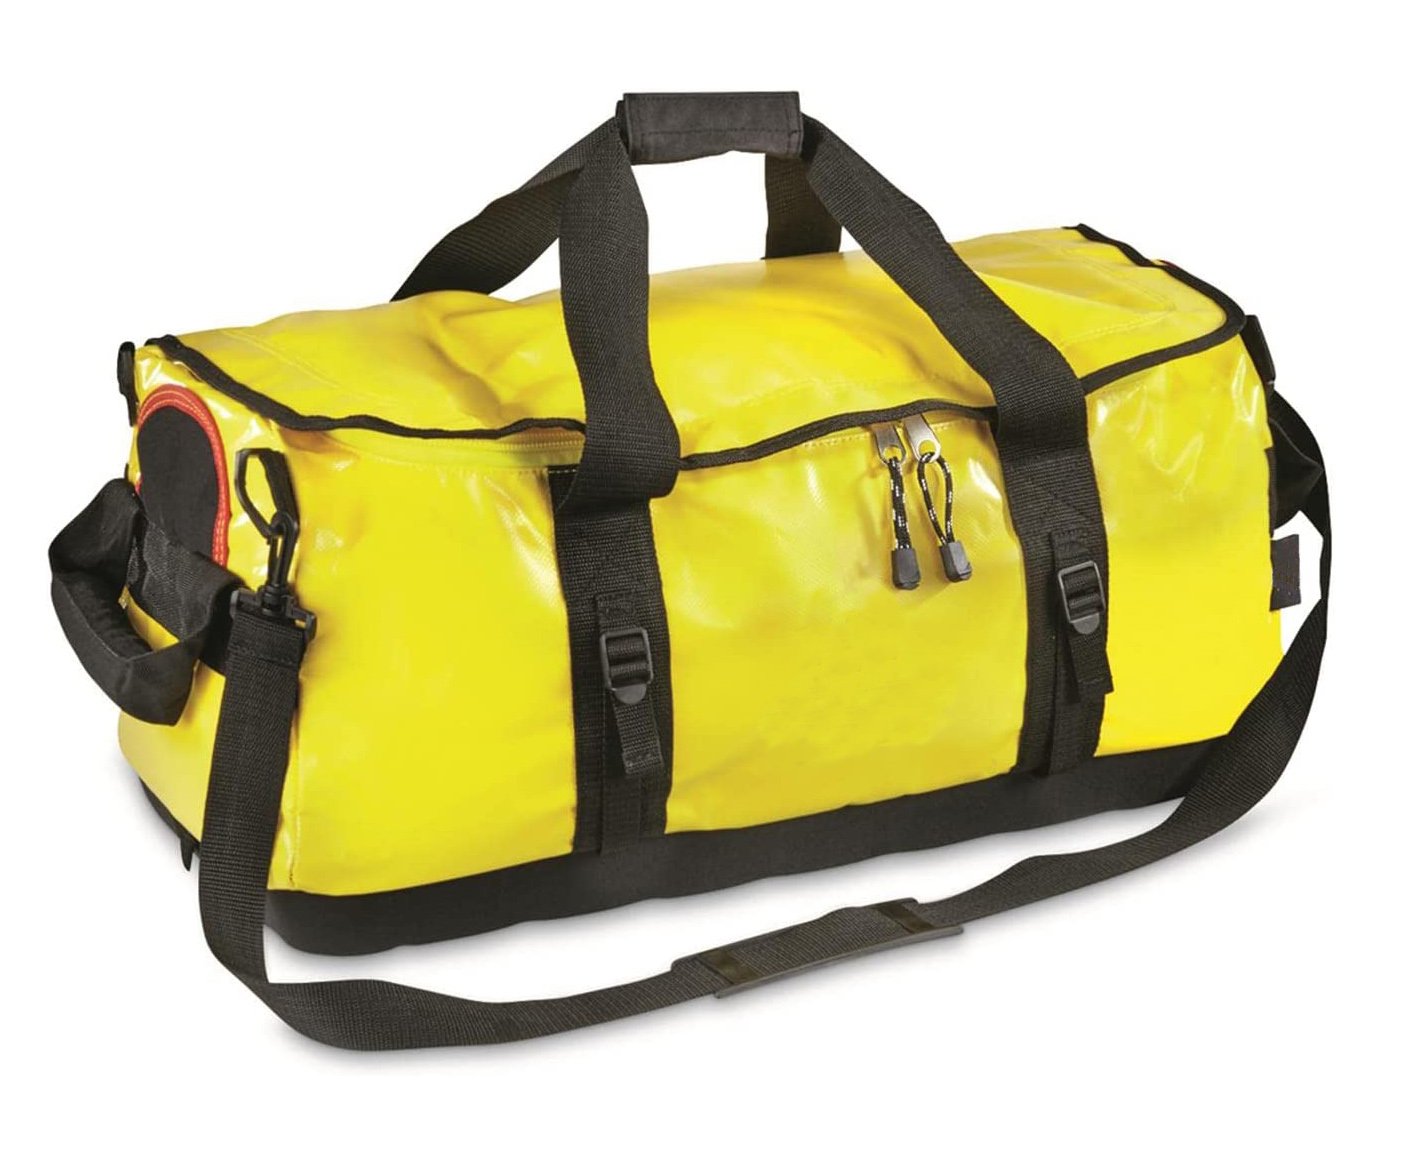 Waterproof Dry Bag for Boating and Fishing, Extra Large